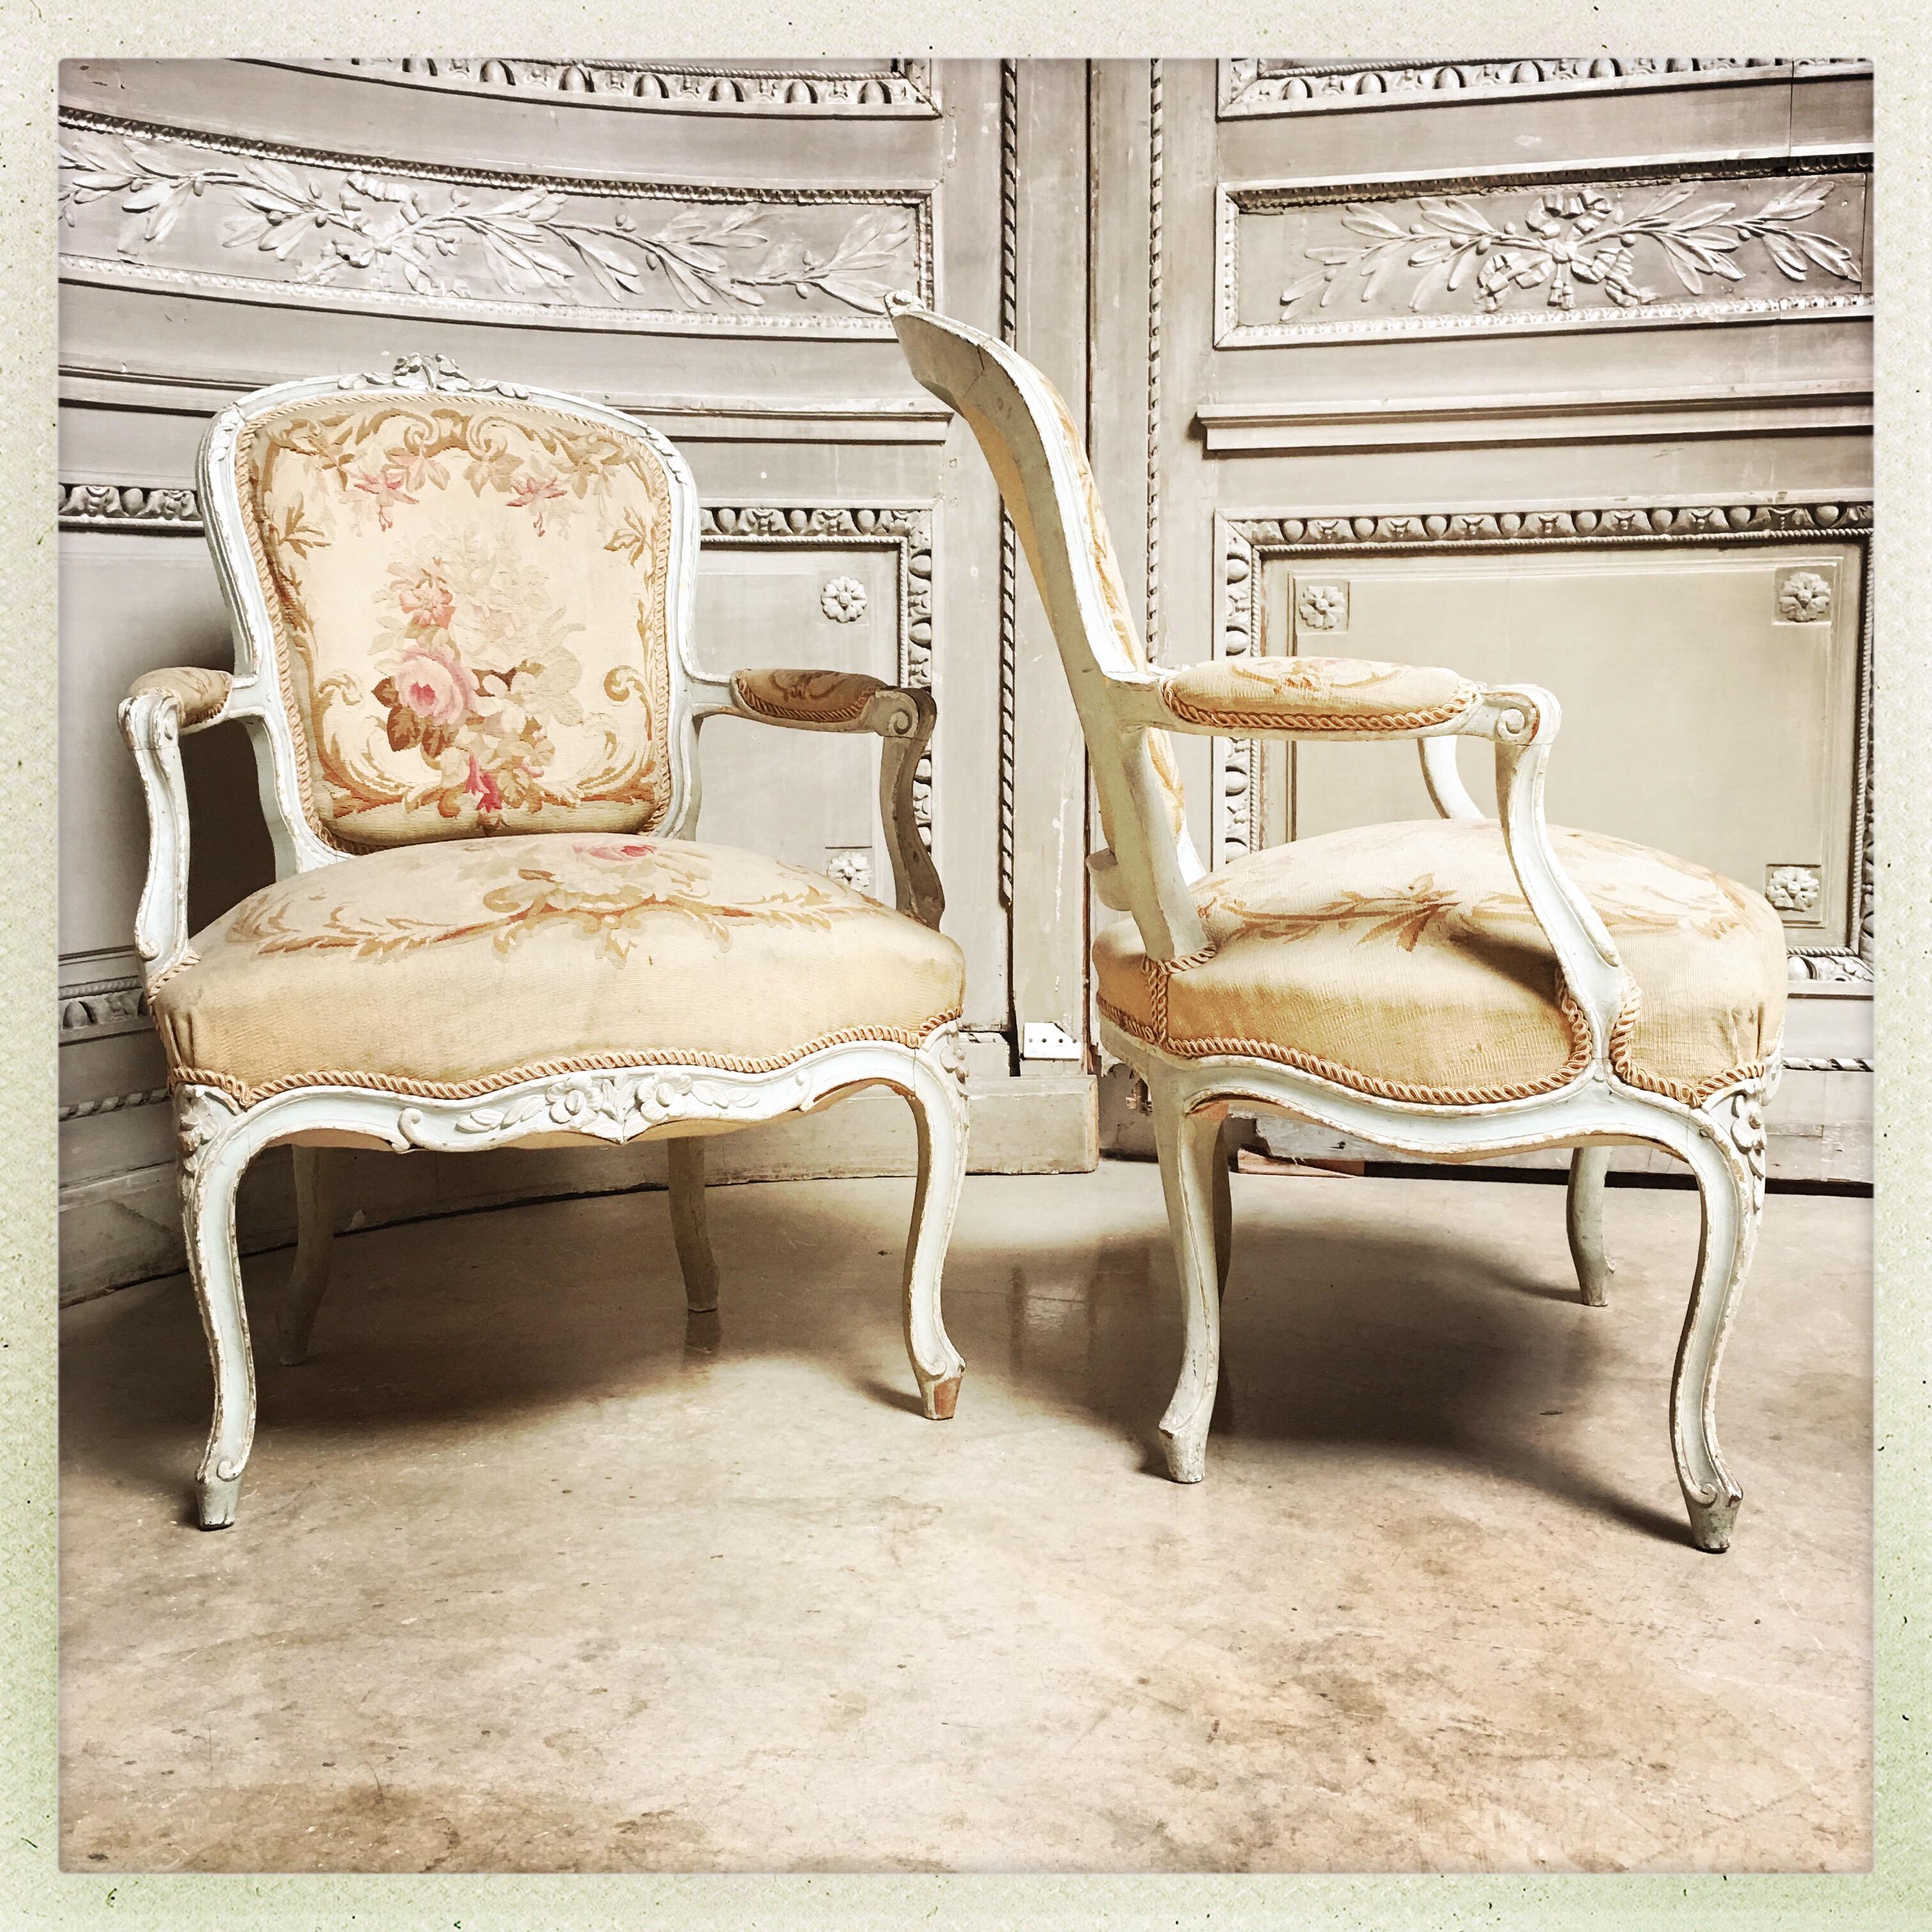 A pair of French Louis XV style fauteuils with a beautiful old painted finish and Aubusson tapestry upholstery.